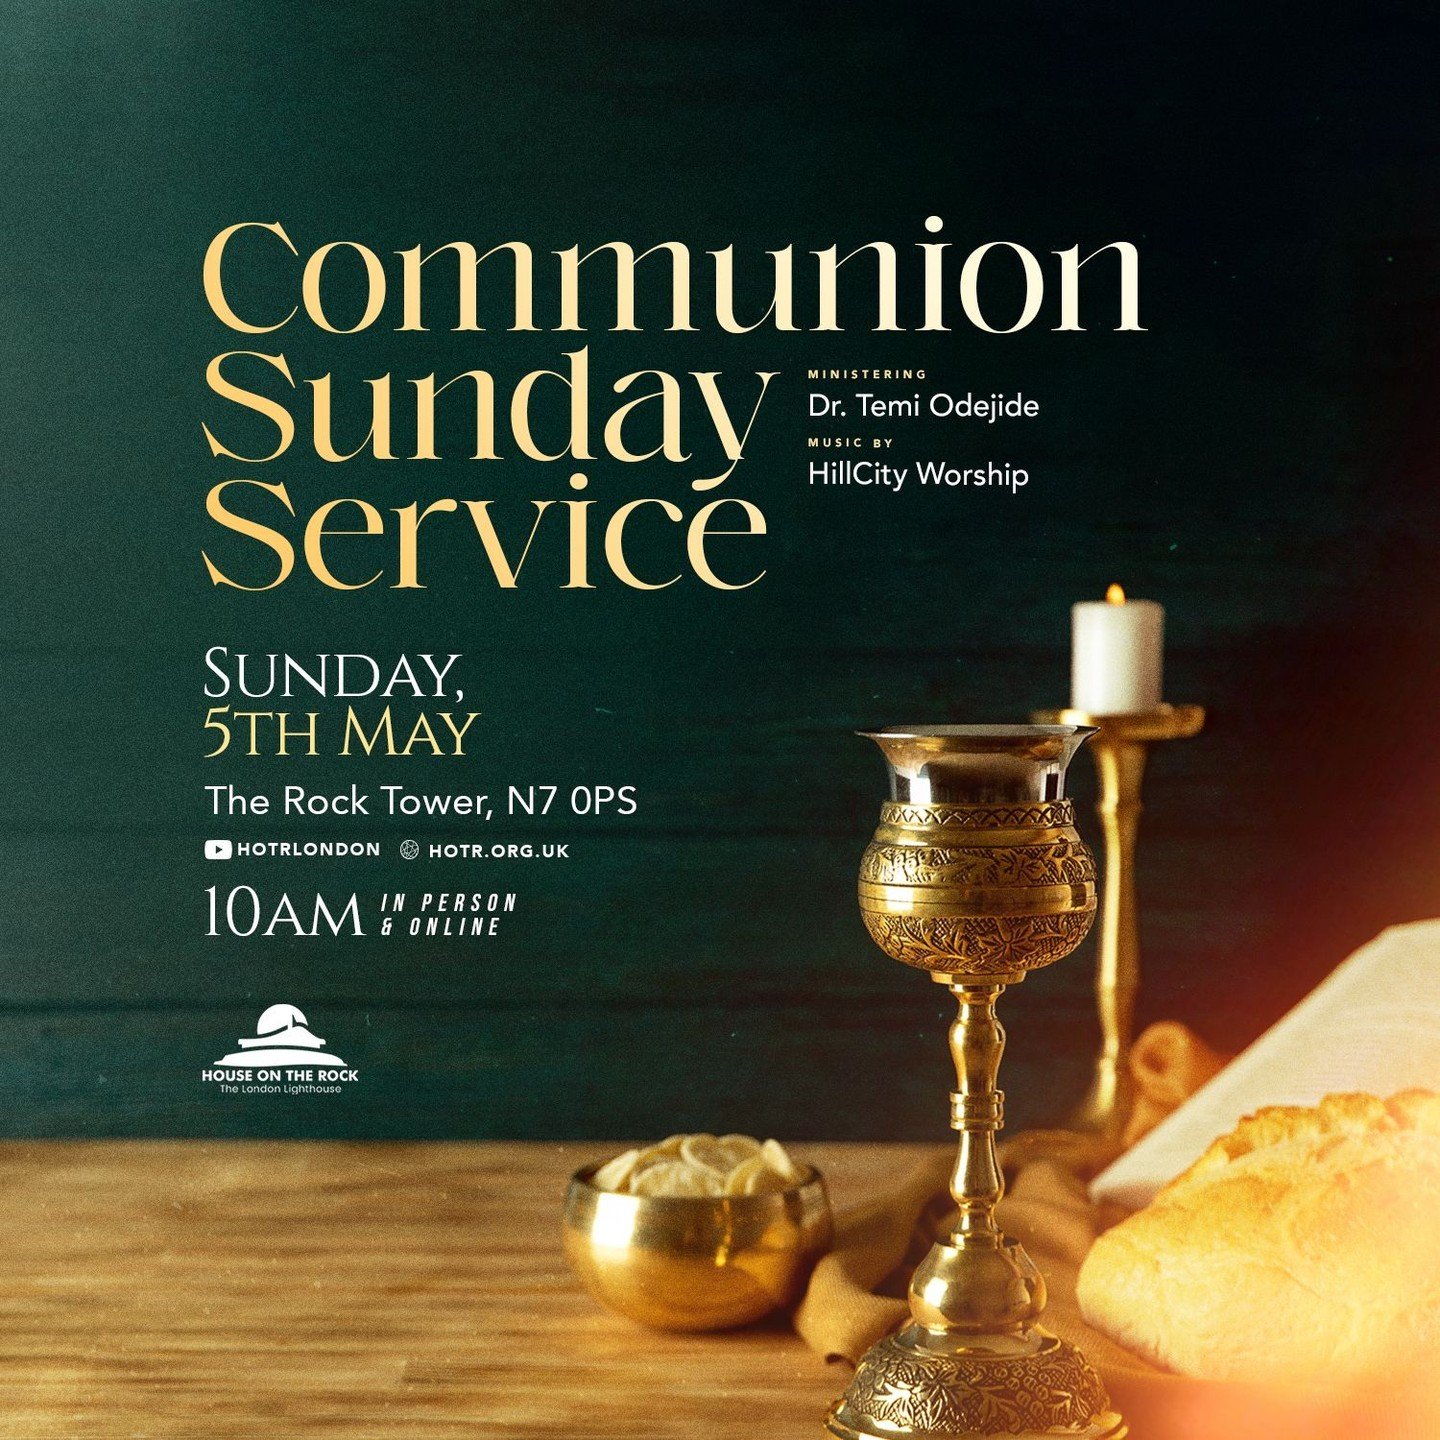 As we have stepped into May, the month of Divine Rest, let&rsquo;s mark the month with communion in remembrance of His promises to us.

By partaking in this Holy ritual, we're reminded of the ultimate power that we have in Christ. Join us as we kick 